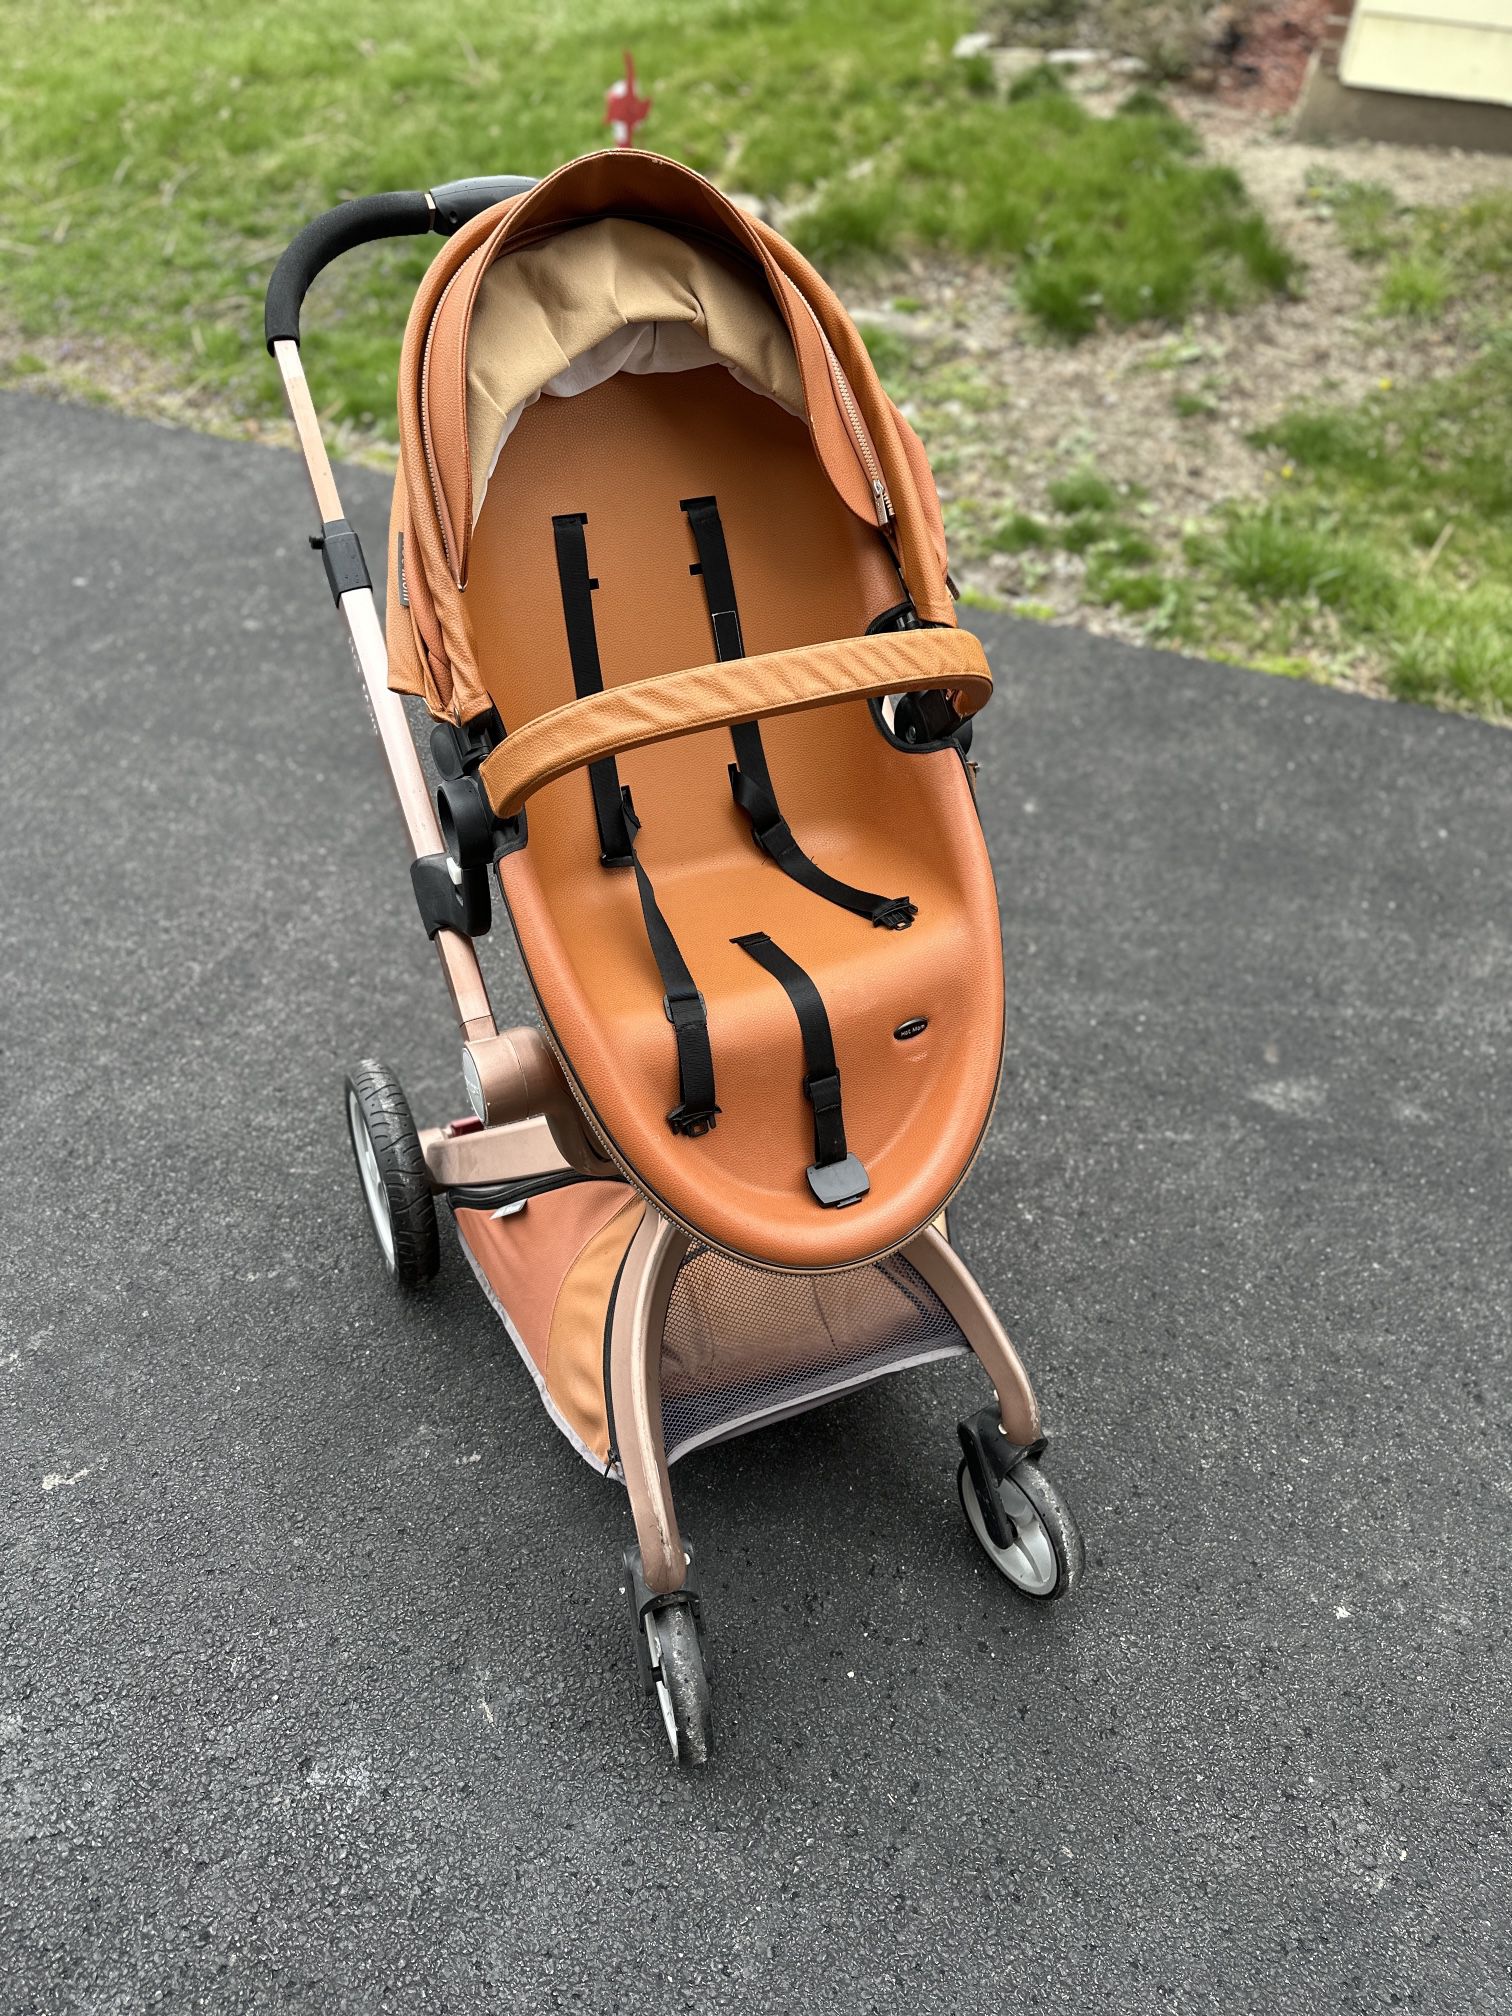 Stroller With Interchangeable Bassinet